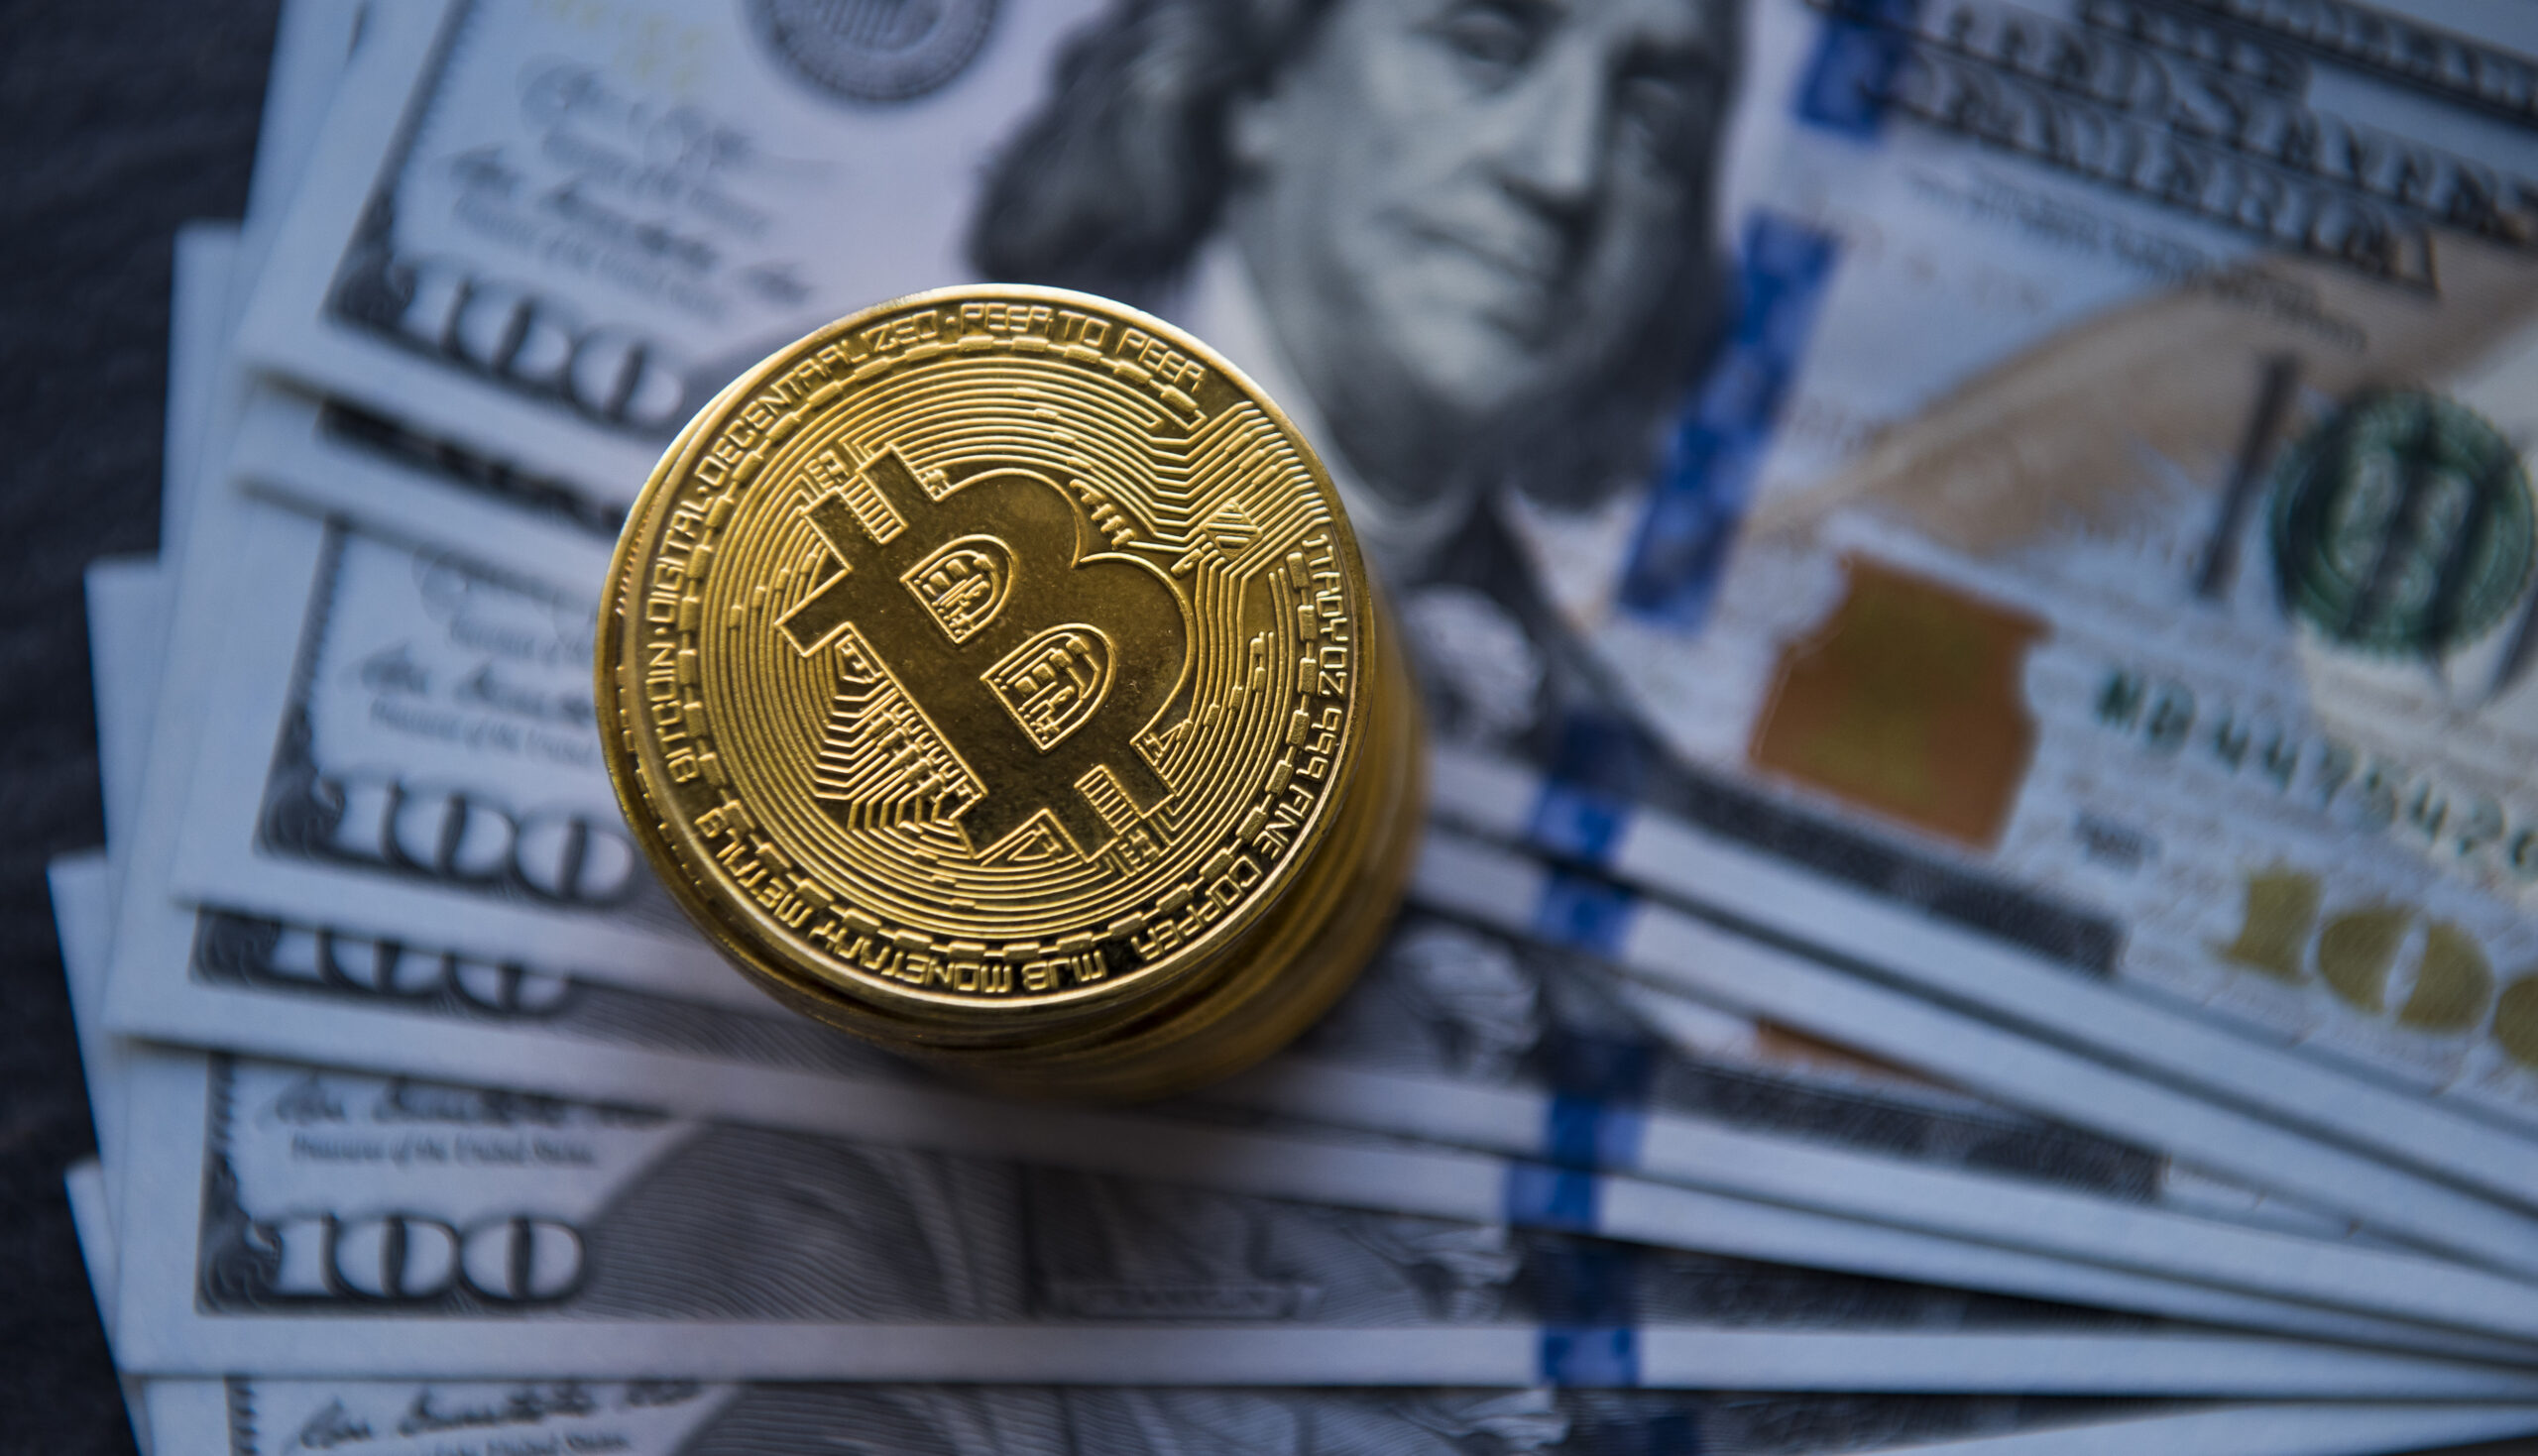 Bitcoin or USD: which is going to rule in the future?